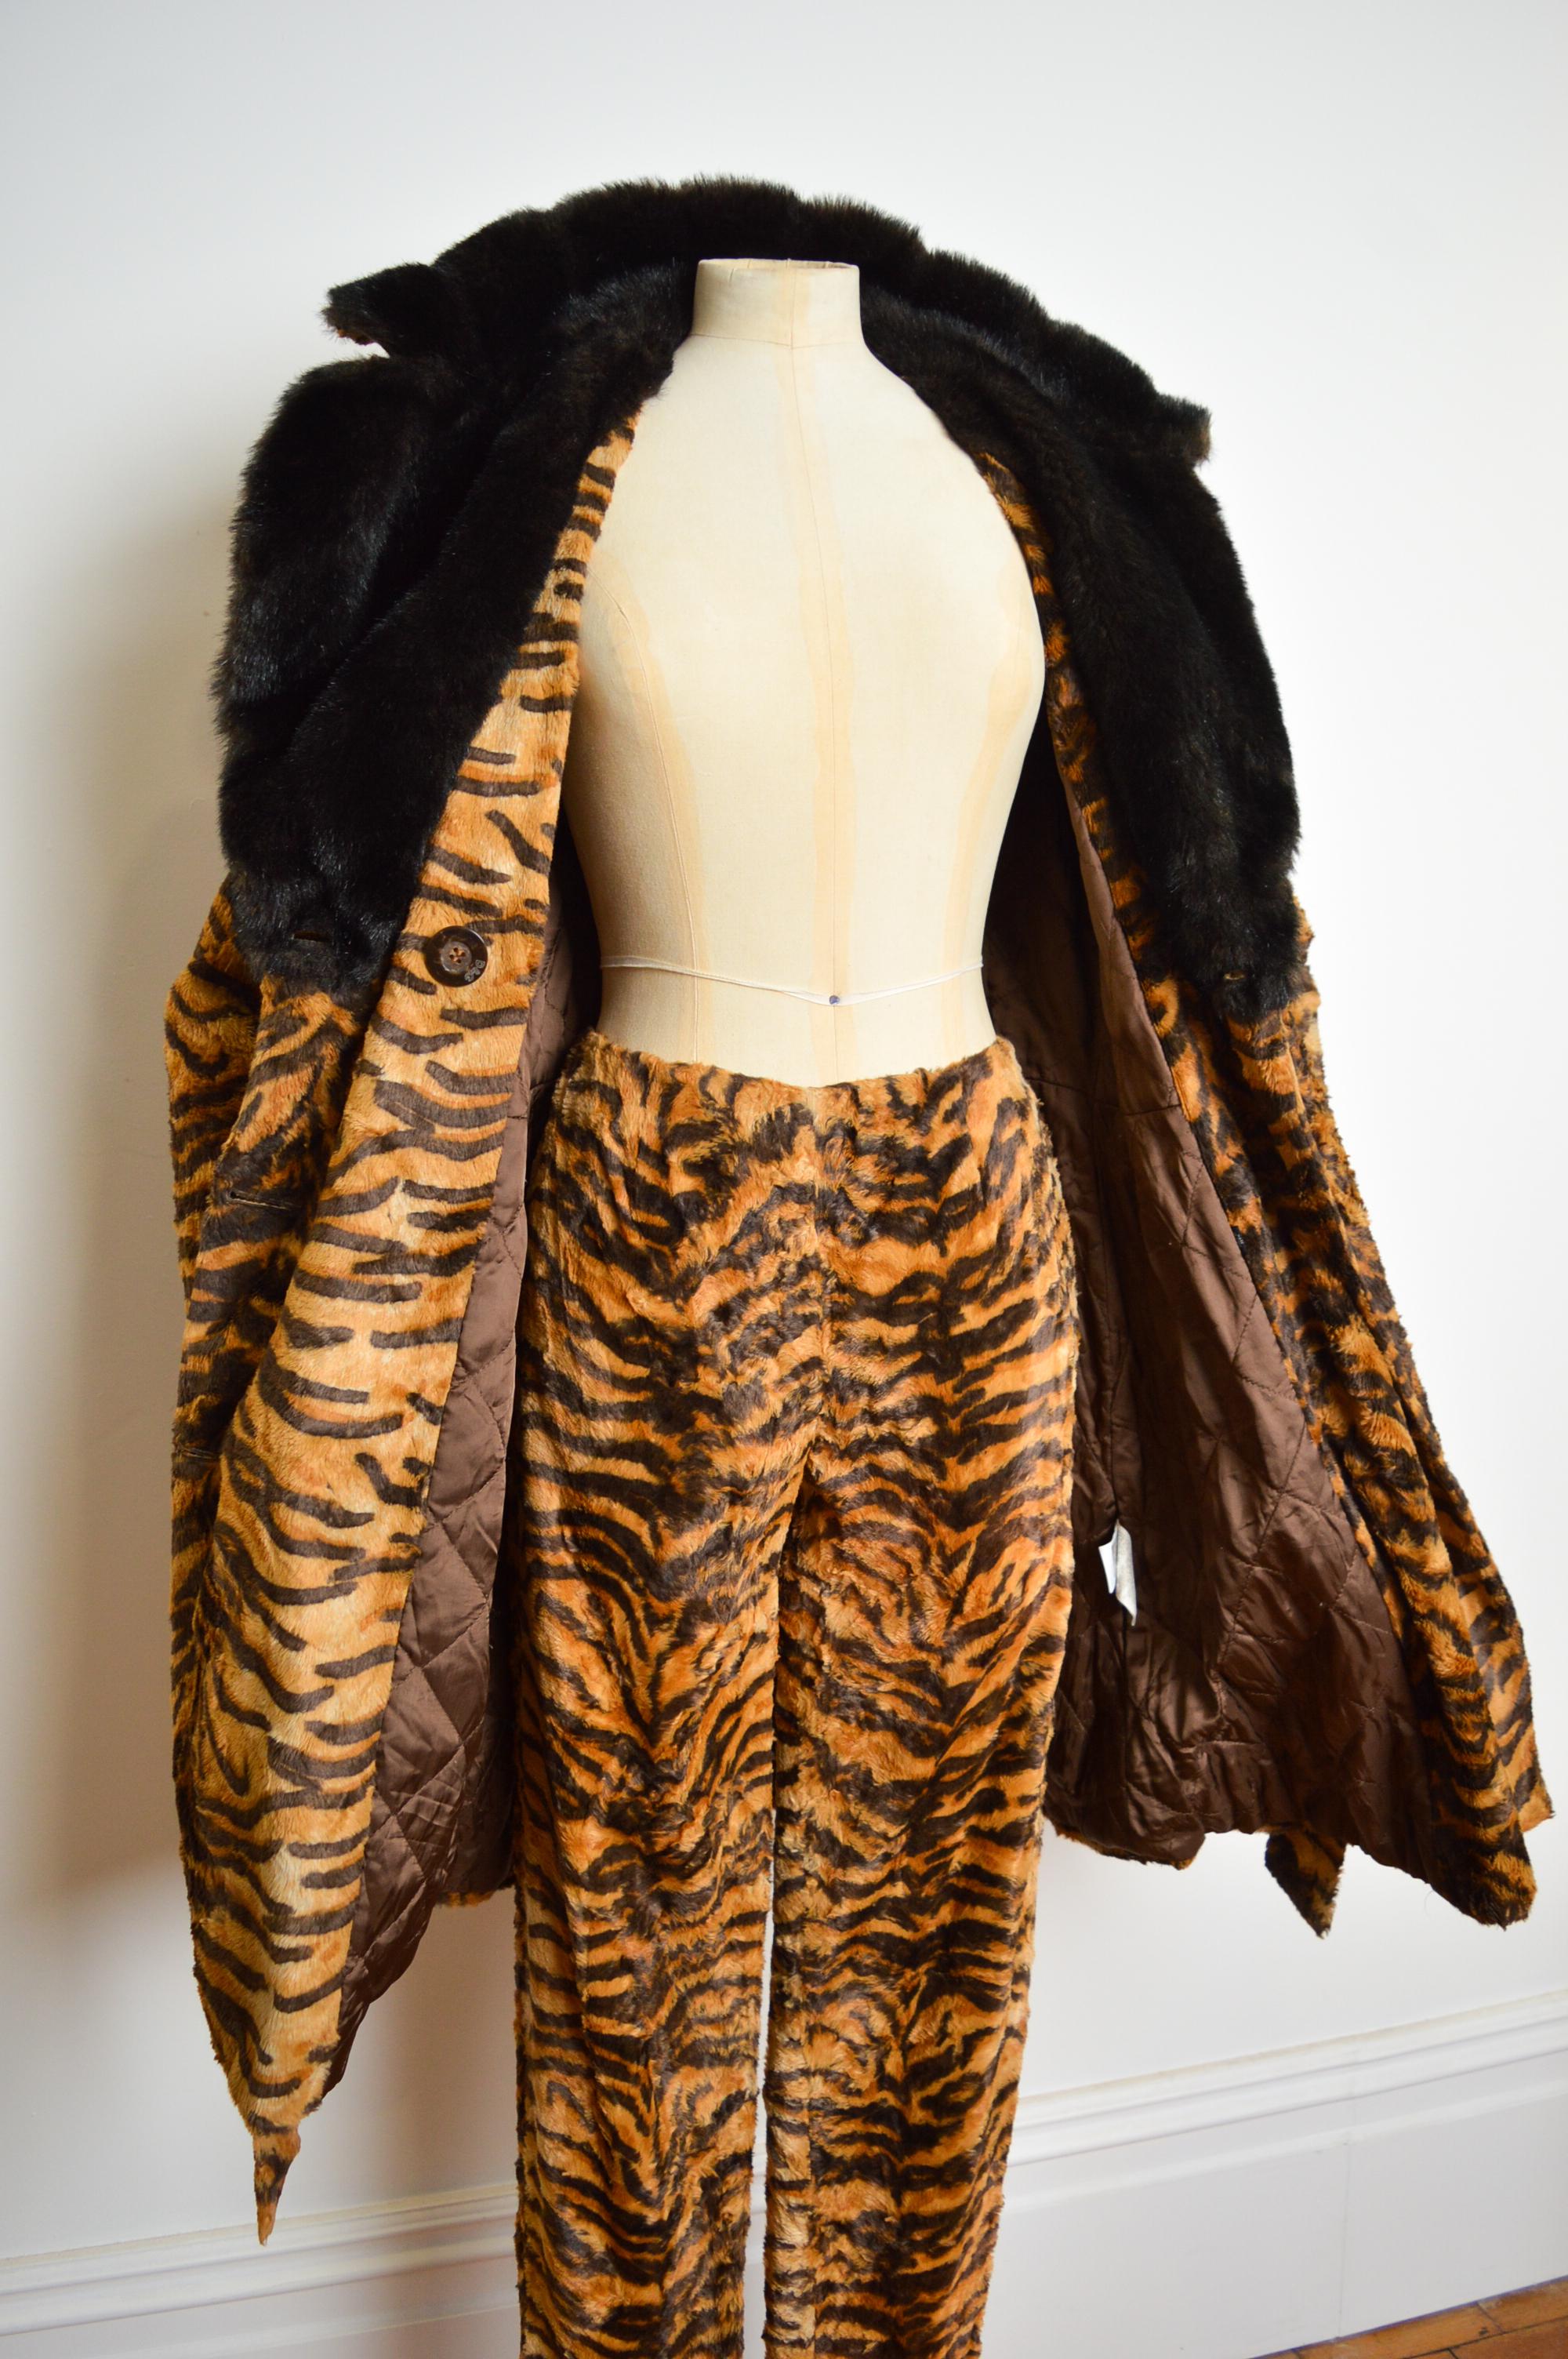 Early 1990's DOLCE & GABBANA Tiger Print Faux Fur Jacket Pants Suit Matching Set For Sale 7